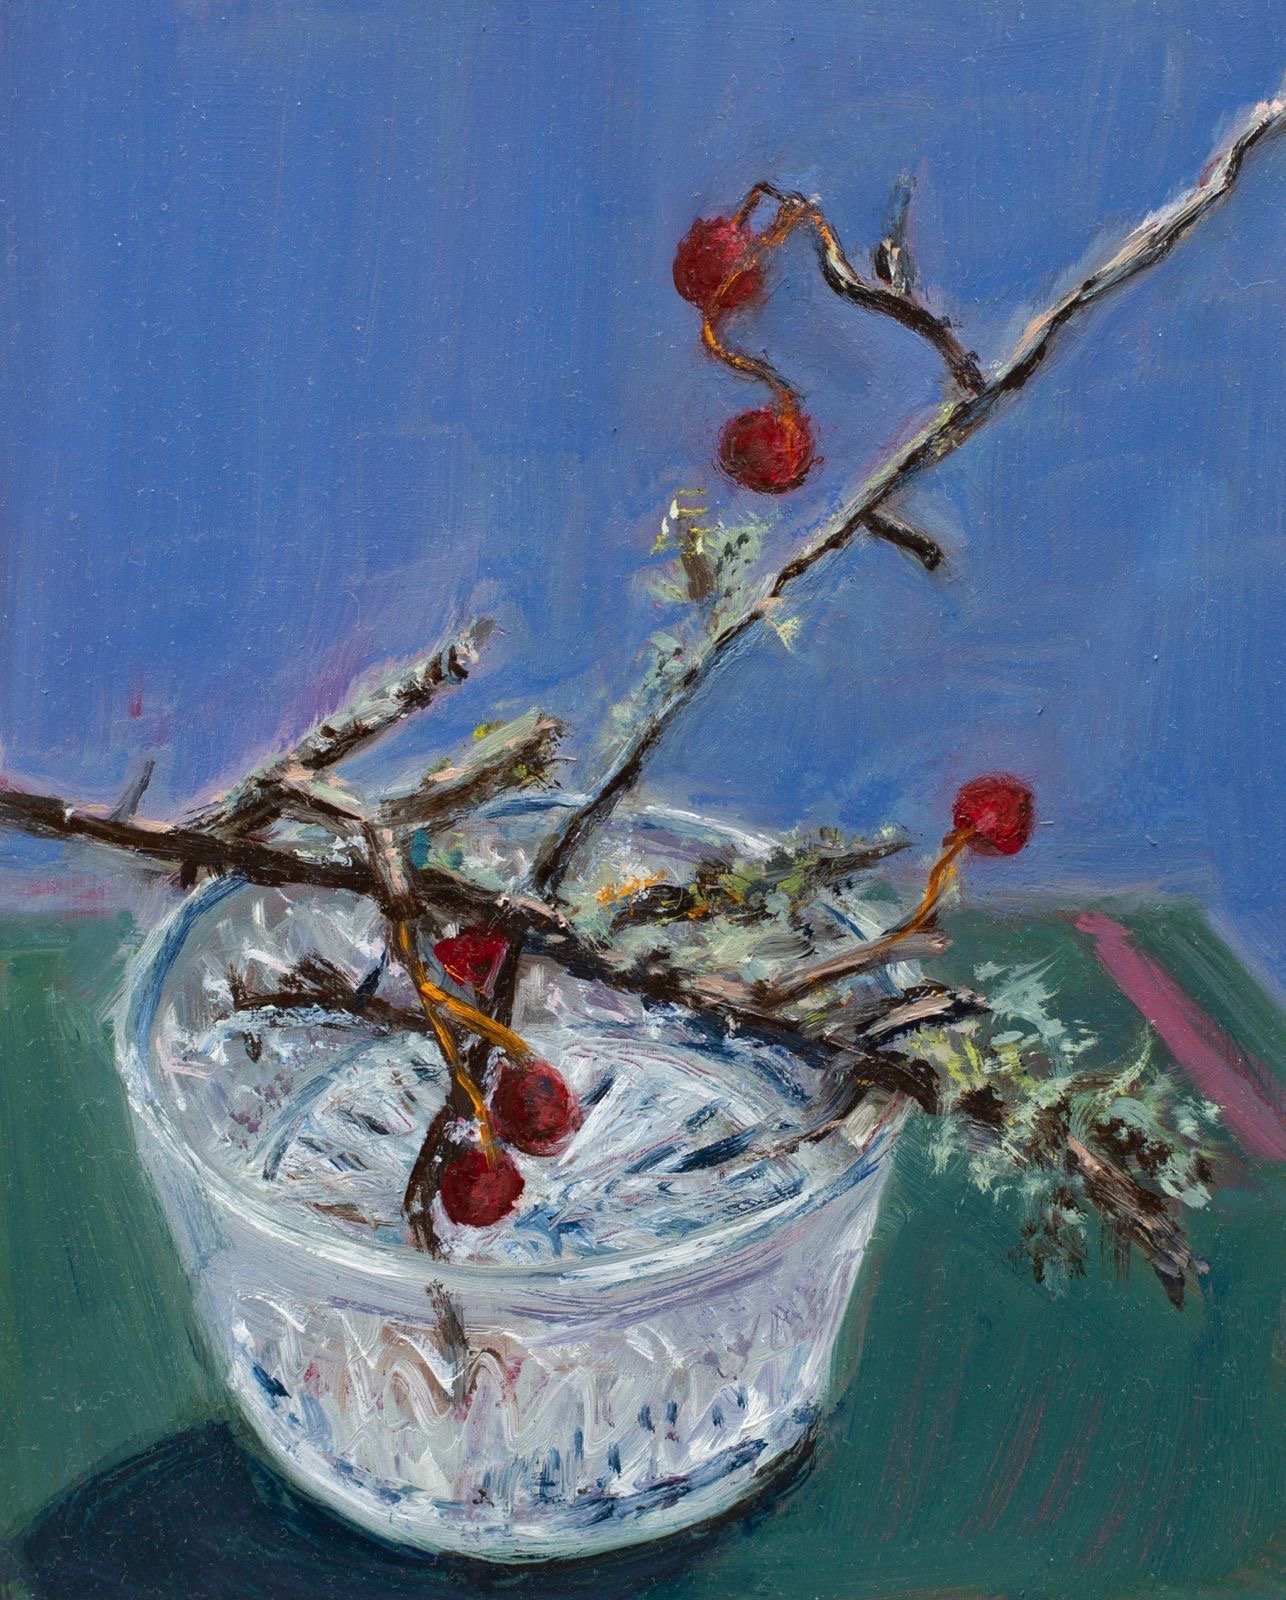 @wykes.rachel  joins us on the 11th &amp; 12th May at THE BARN ON THE GREEN 
VENUE 12 part of @artinditchling trail for @artistsopenhouses 

Rachel paints in oils focusing on still-life compositions. She enjoys celebrating weeds and wildflowers in th